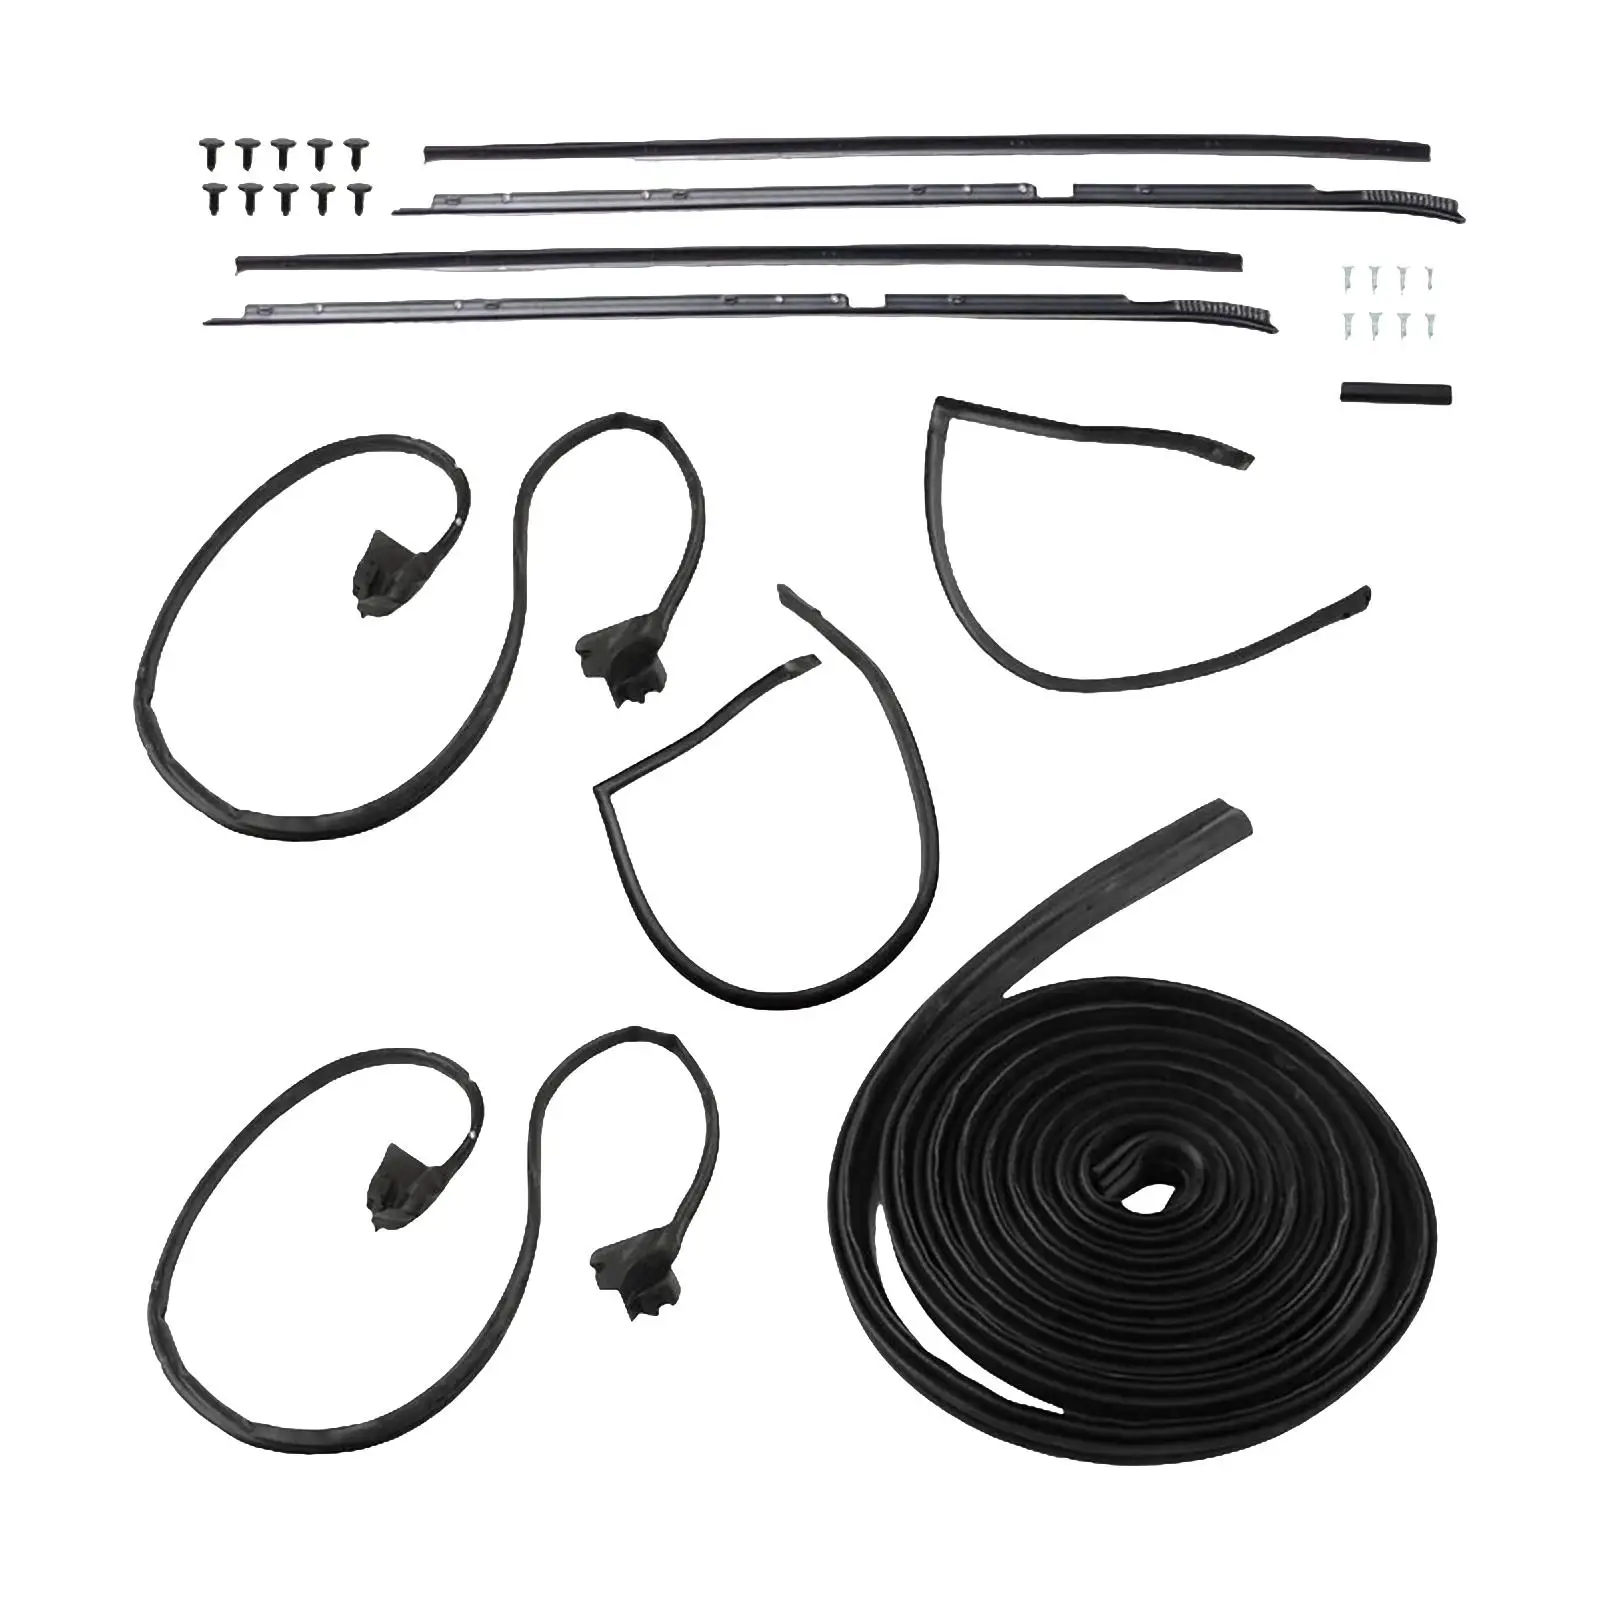 Weatherstripping Seal Kit Replaces High Performance Premium Car Accessories 568979 Window Seal Strip Rubber for Buick Regal